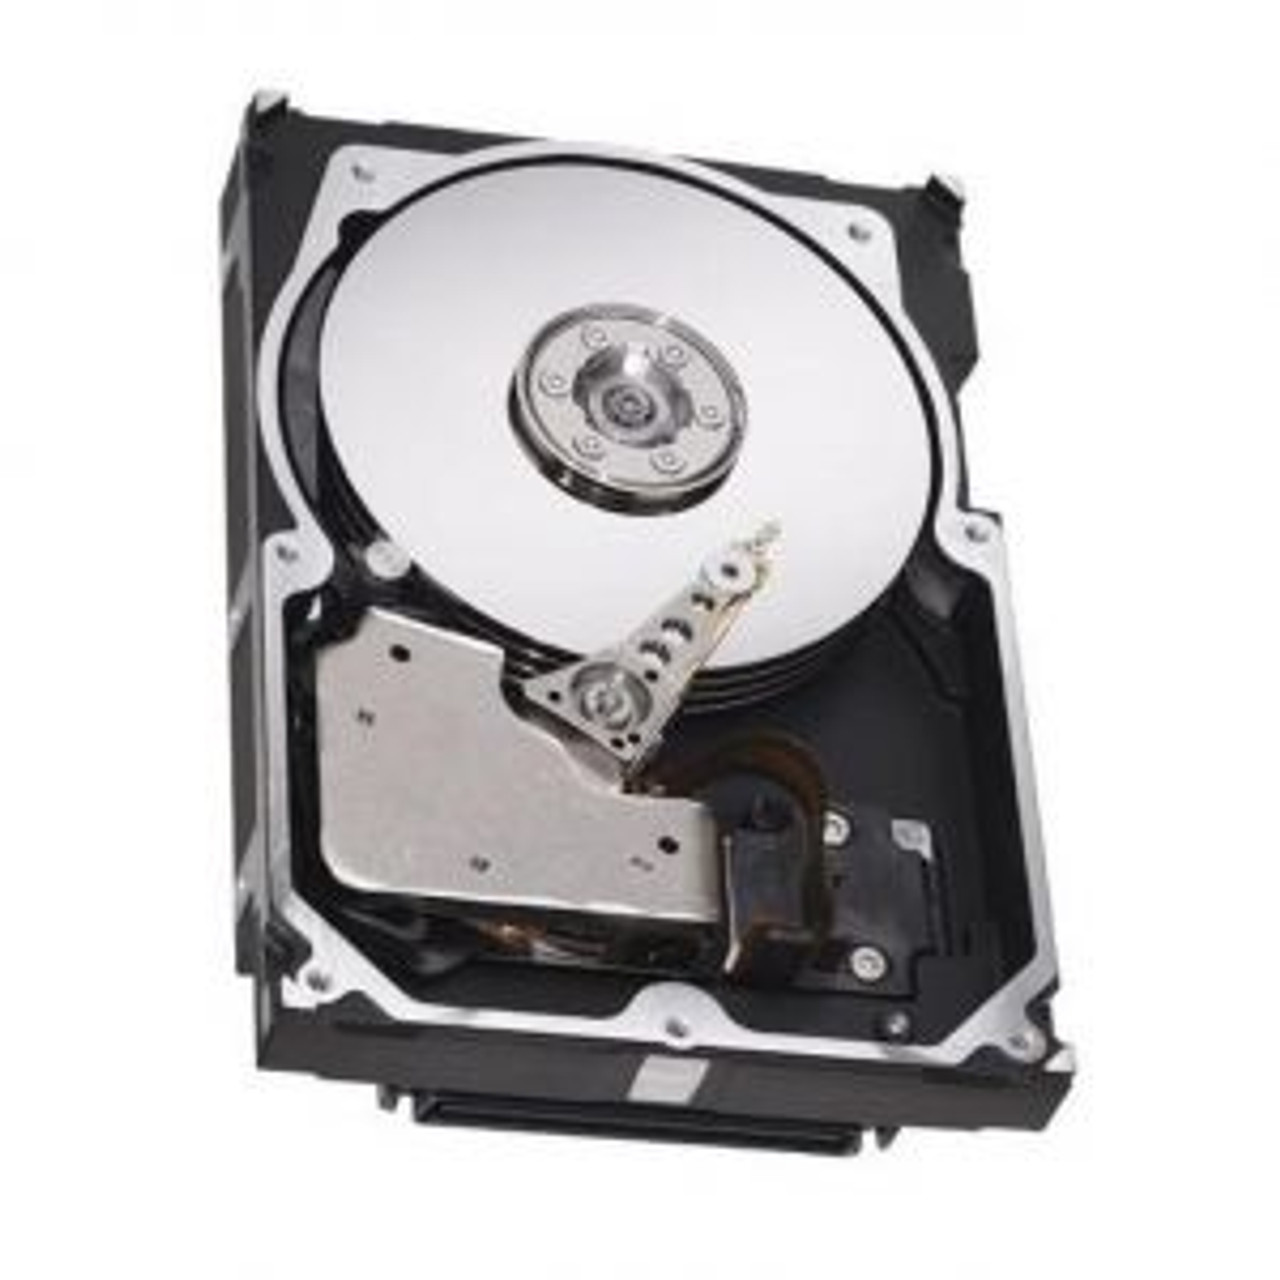 0950-2605 HP 2GB 5400RPM Fast Wide SCSI 512KB Cache Single-Ended 68-Pin 3.5-inch Internal Hard Drive